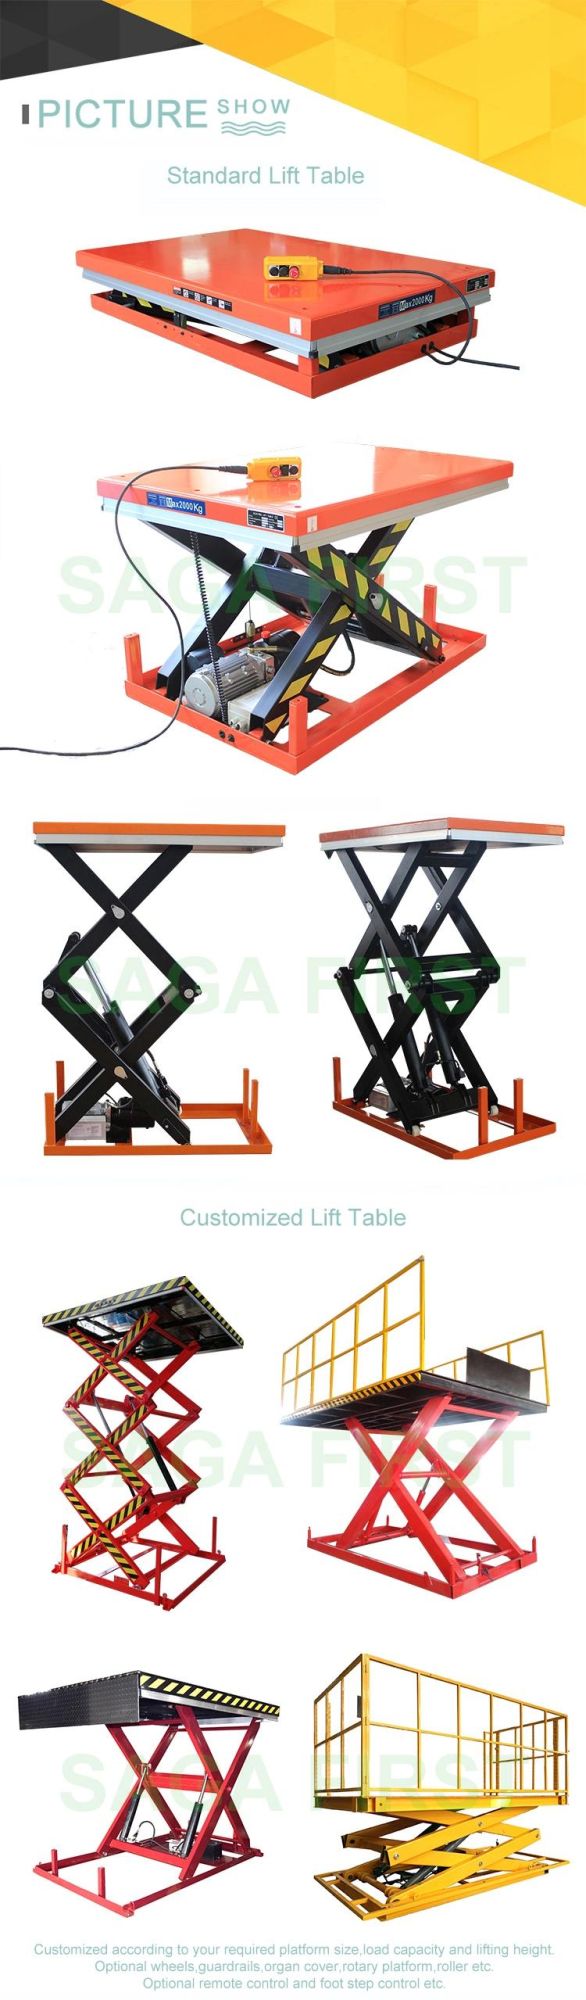 Air Lifting Jack Hydraulic Scissor Drywall Lift Tables Small Lifts Low Price